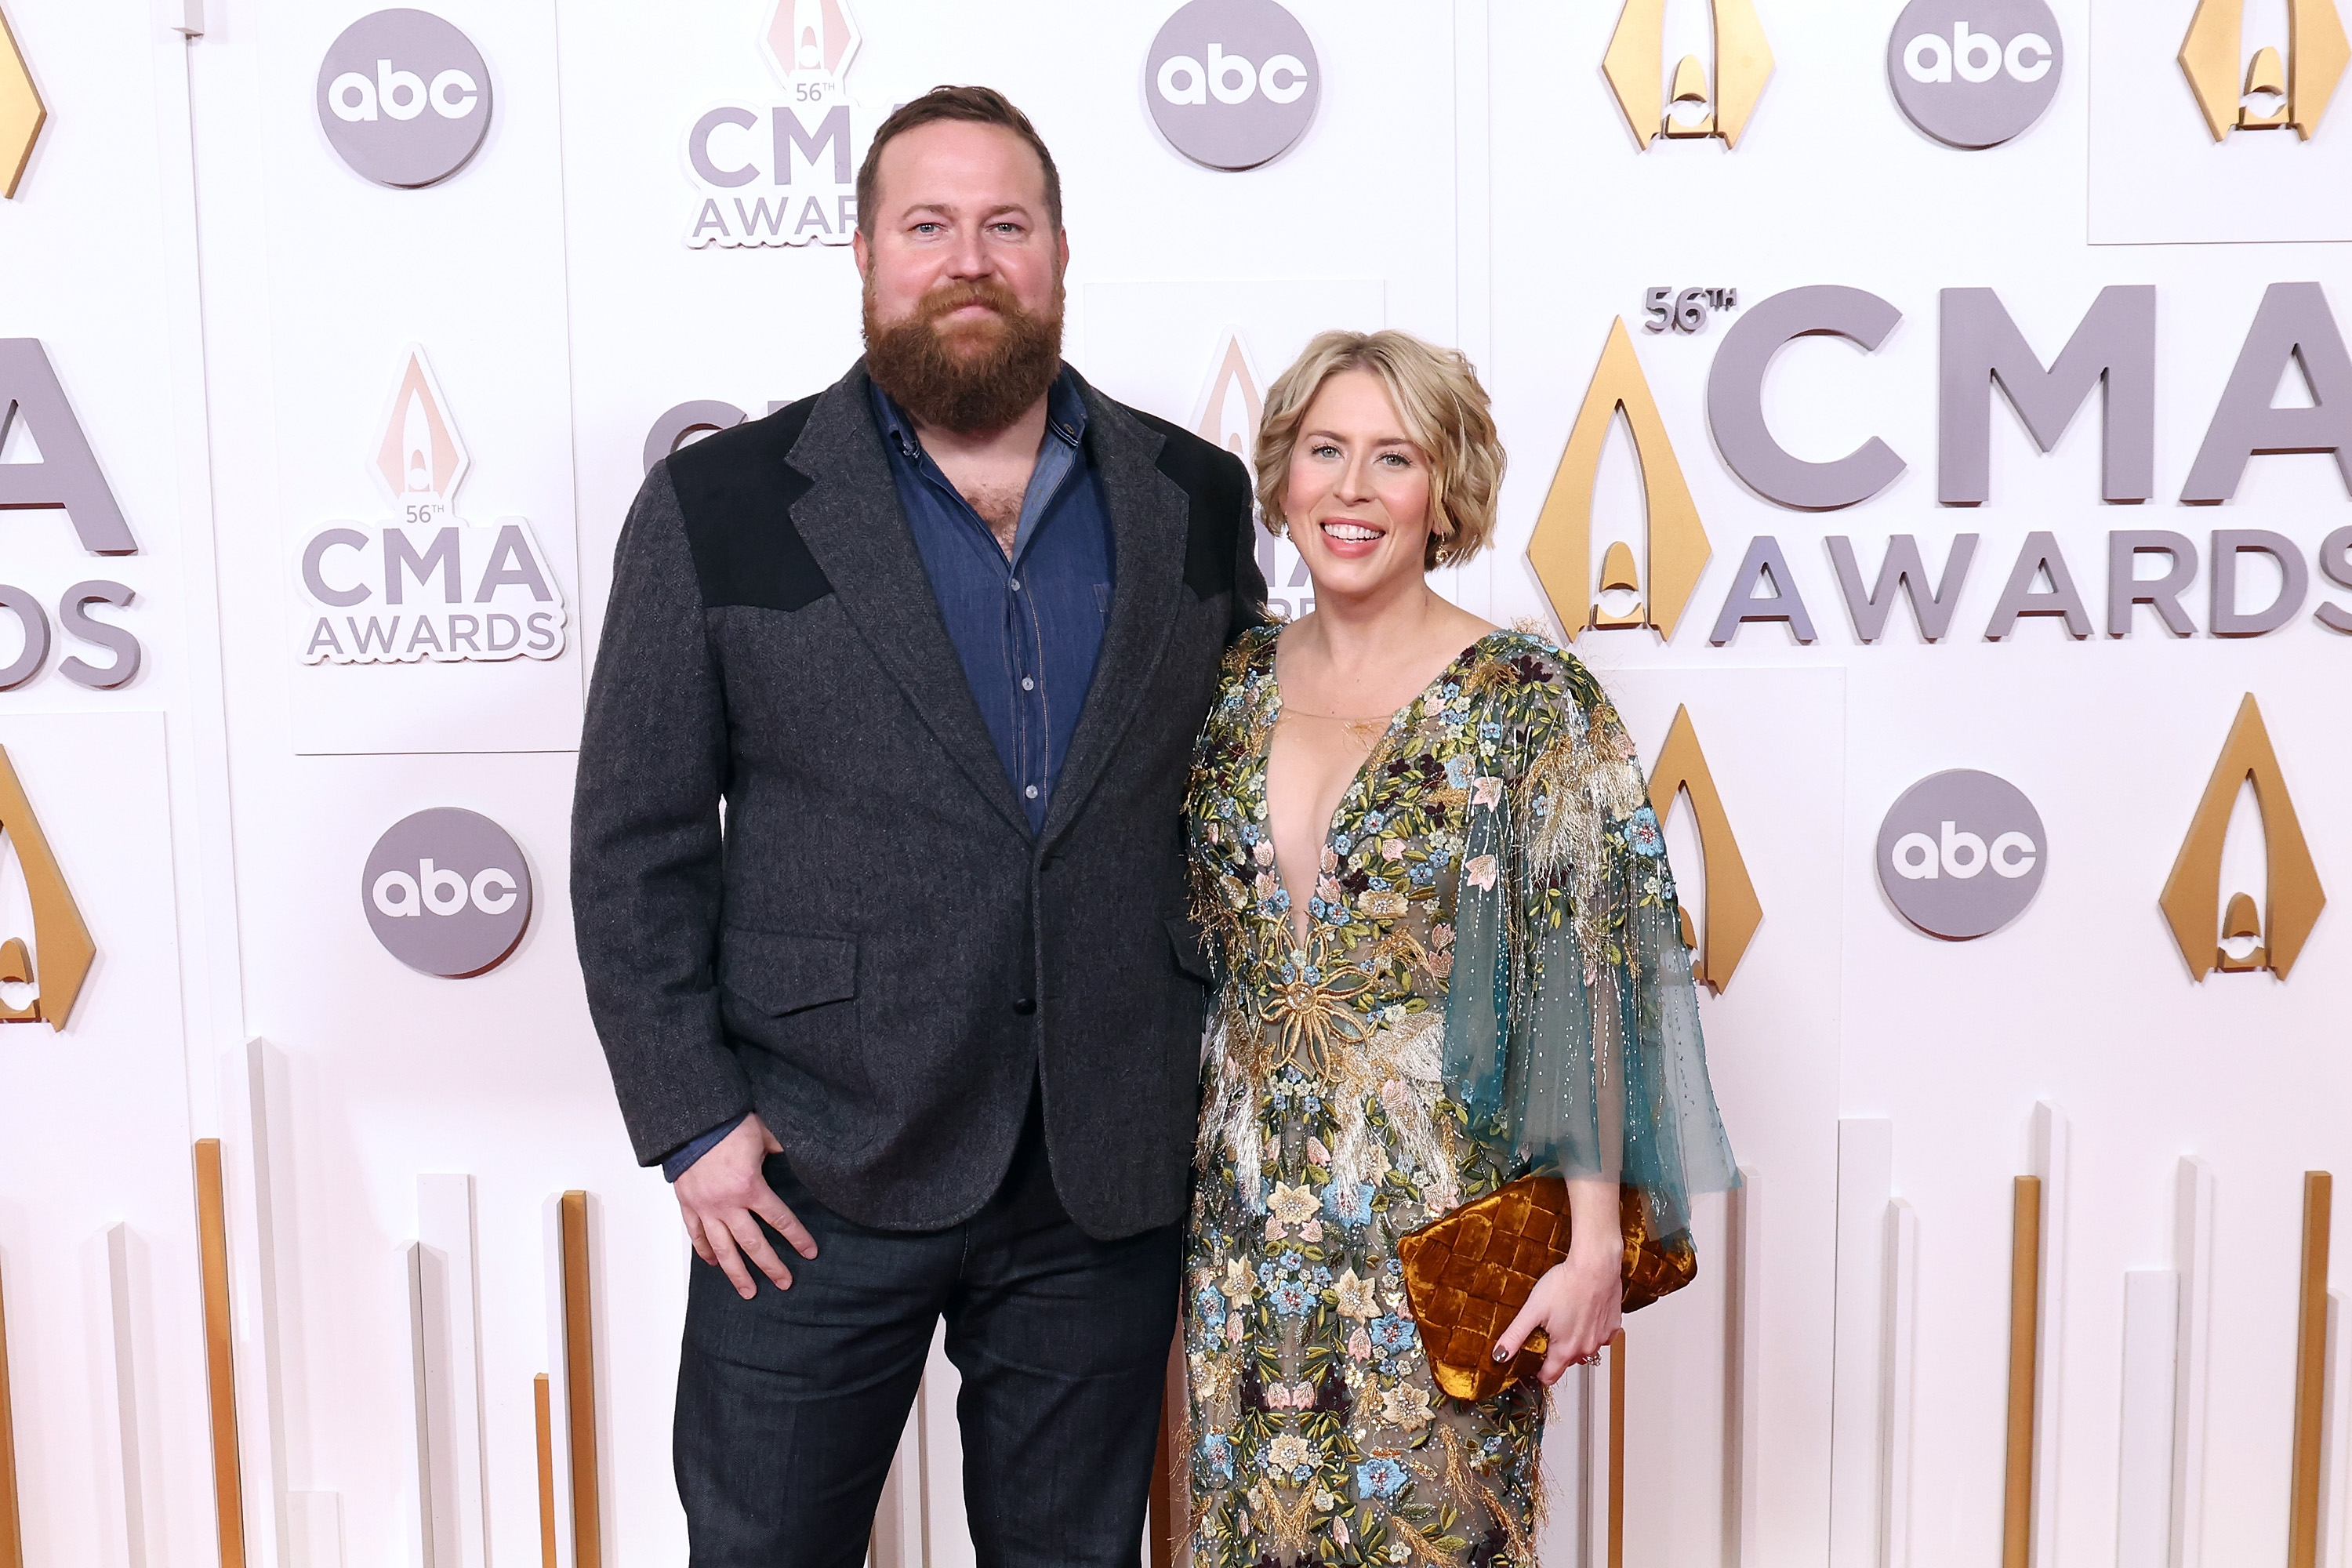 Ben and Erin Napier of HGTV's 'Home Town' on the red carpet at the CMA Awards